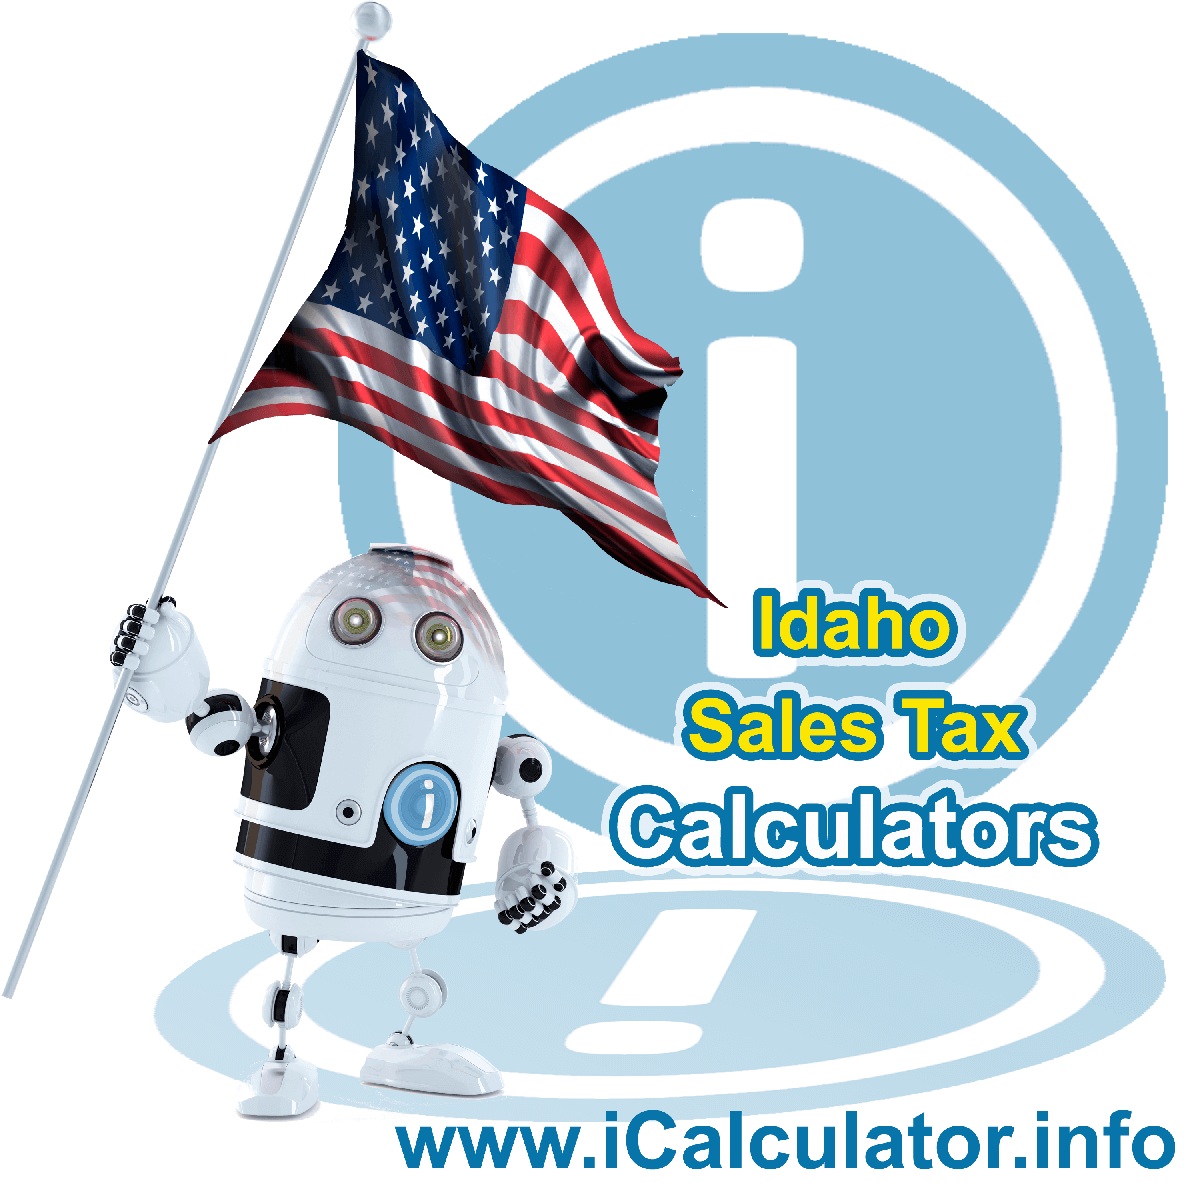 Stanley Sales Rates: This image illustrates a calculator robot calculating Stanley sales tax manually using the Stanley Sales Tax Formula. You can use this information to calculate Stanley Sales Tax manually or use the Stanley Sales Tax Calculator to calculate sales tax online.